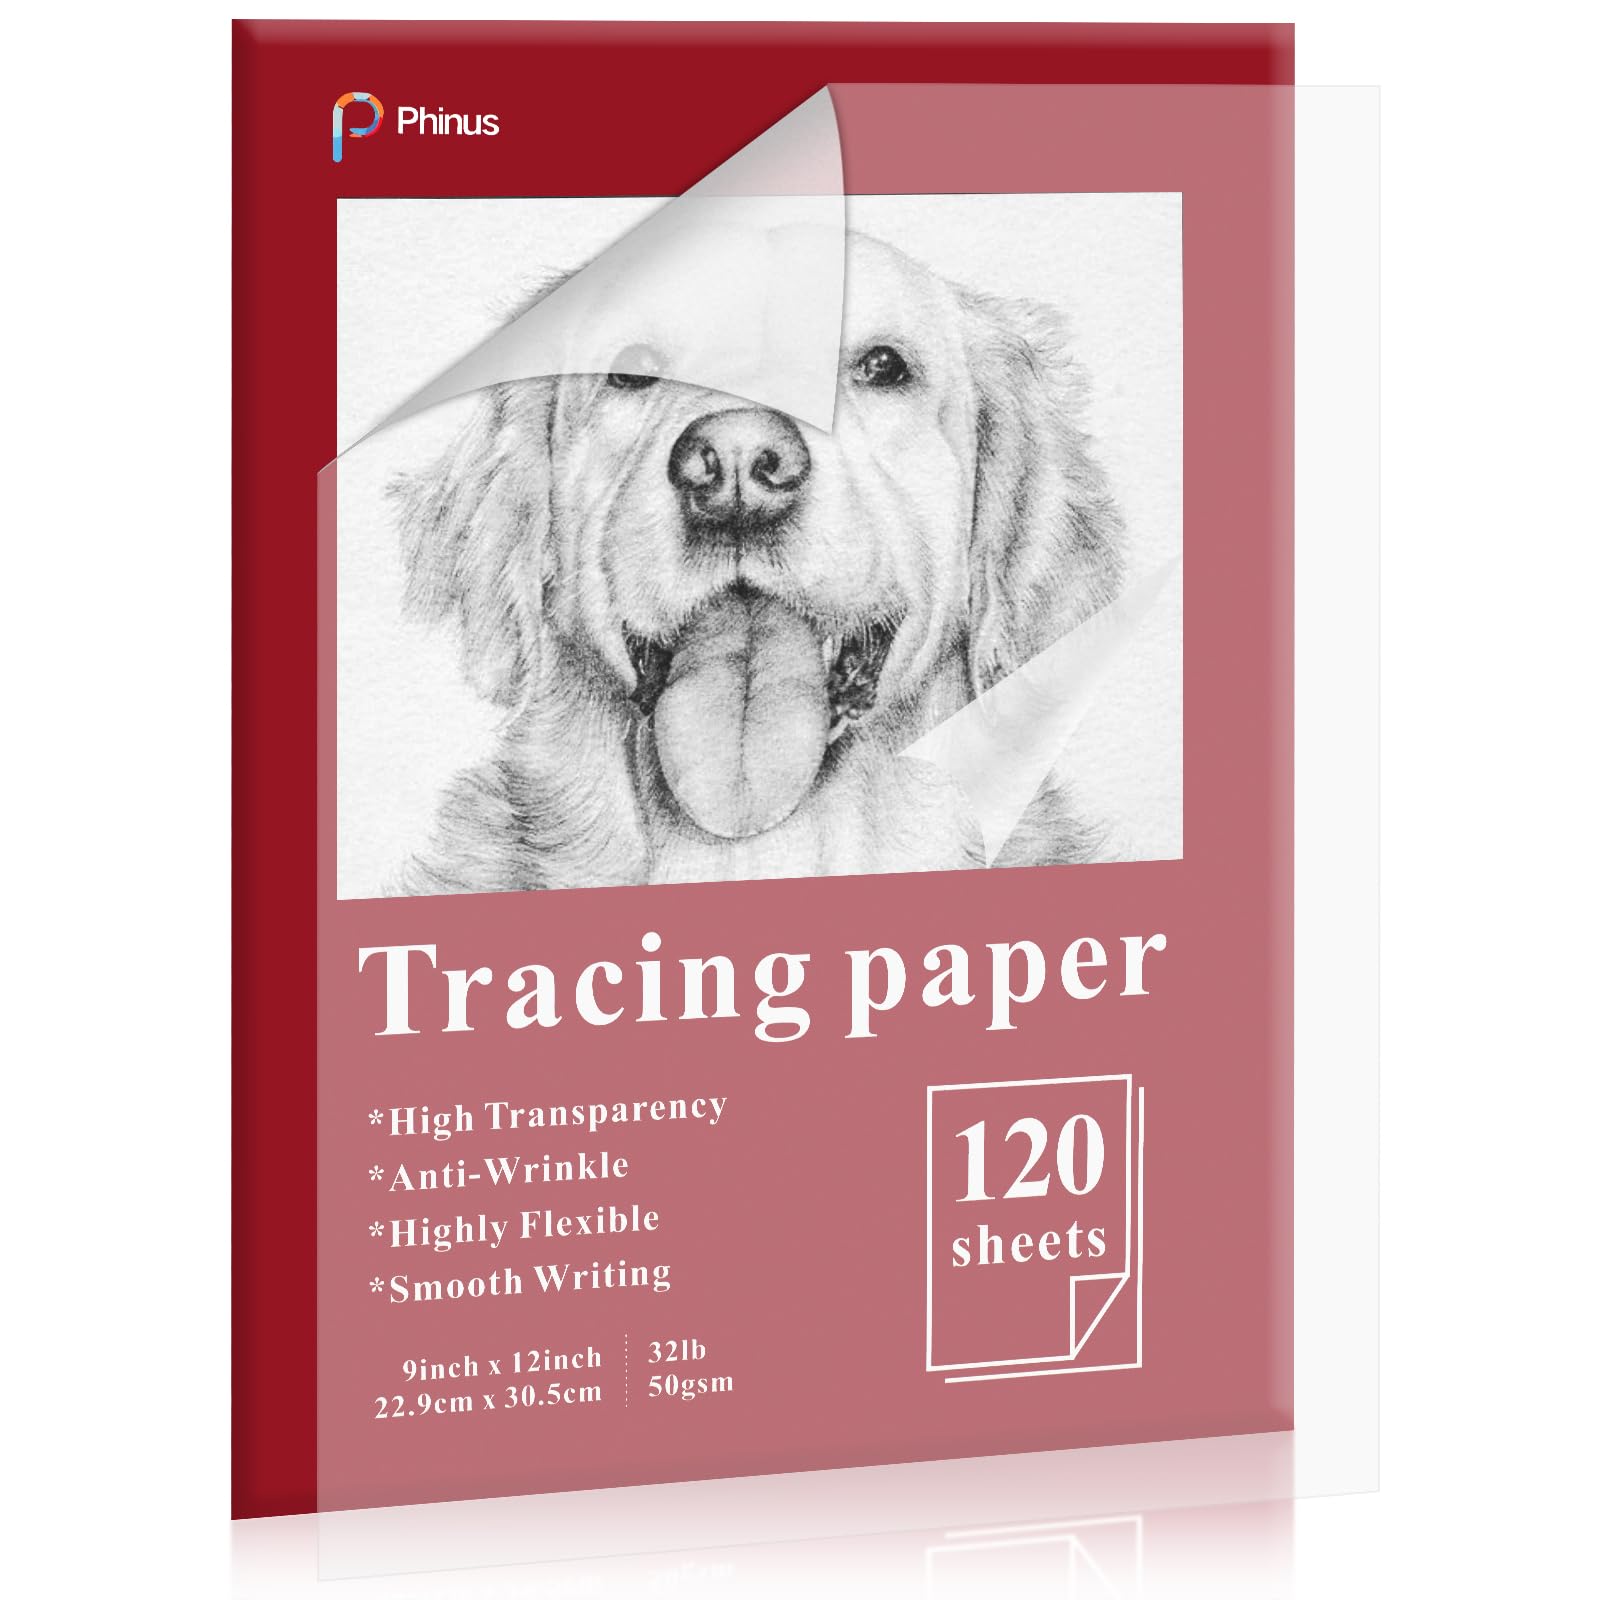 Phinus 120 Sheets Tracing Paper for Drawing, 9x12 Trace Paper, Translucent Vellum Paper Tracing Paper Pad, Tracing Pad for Sketching, P